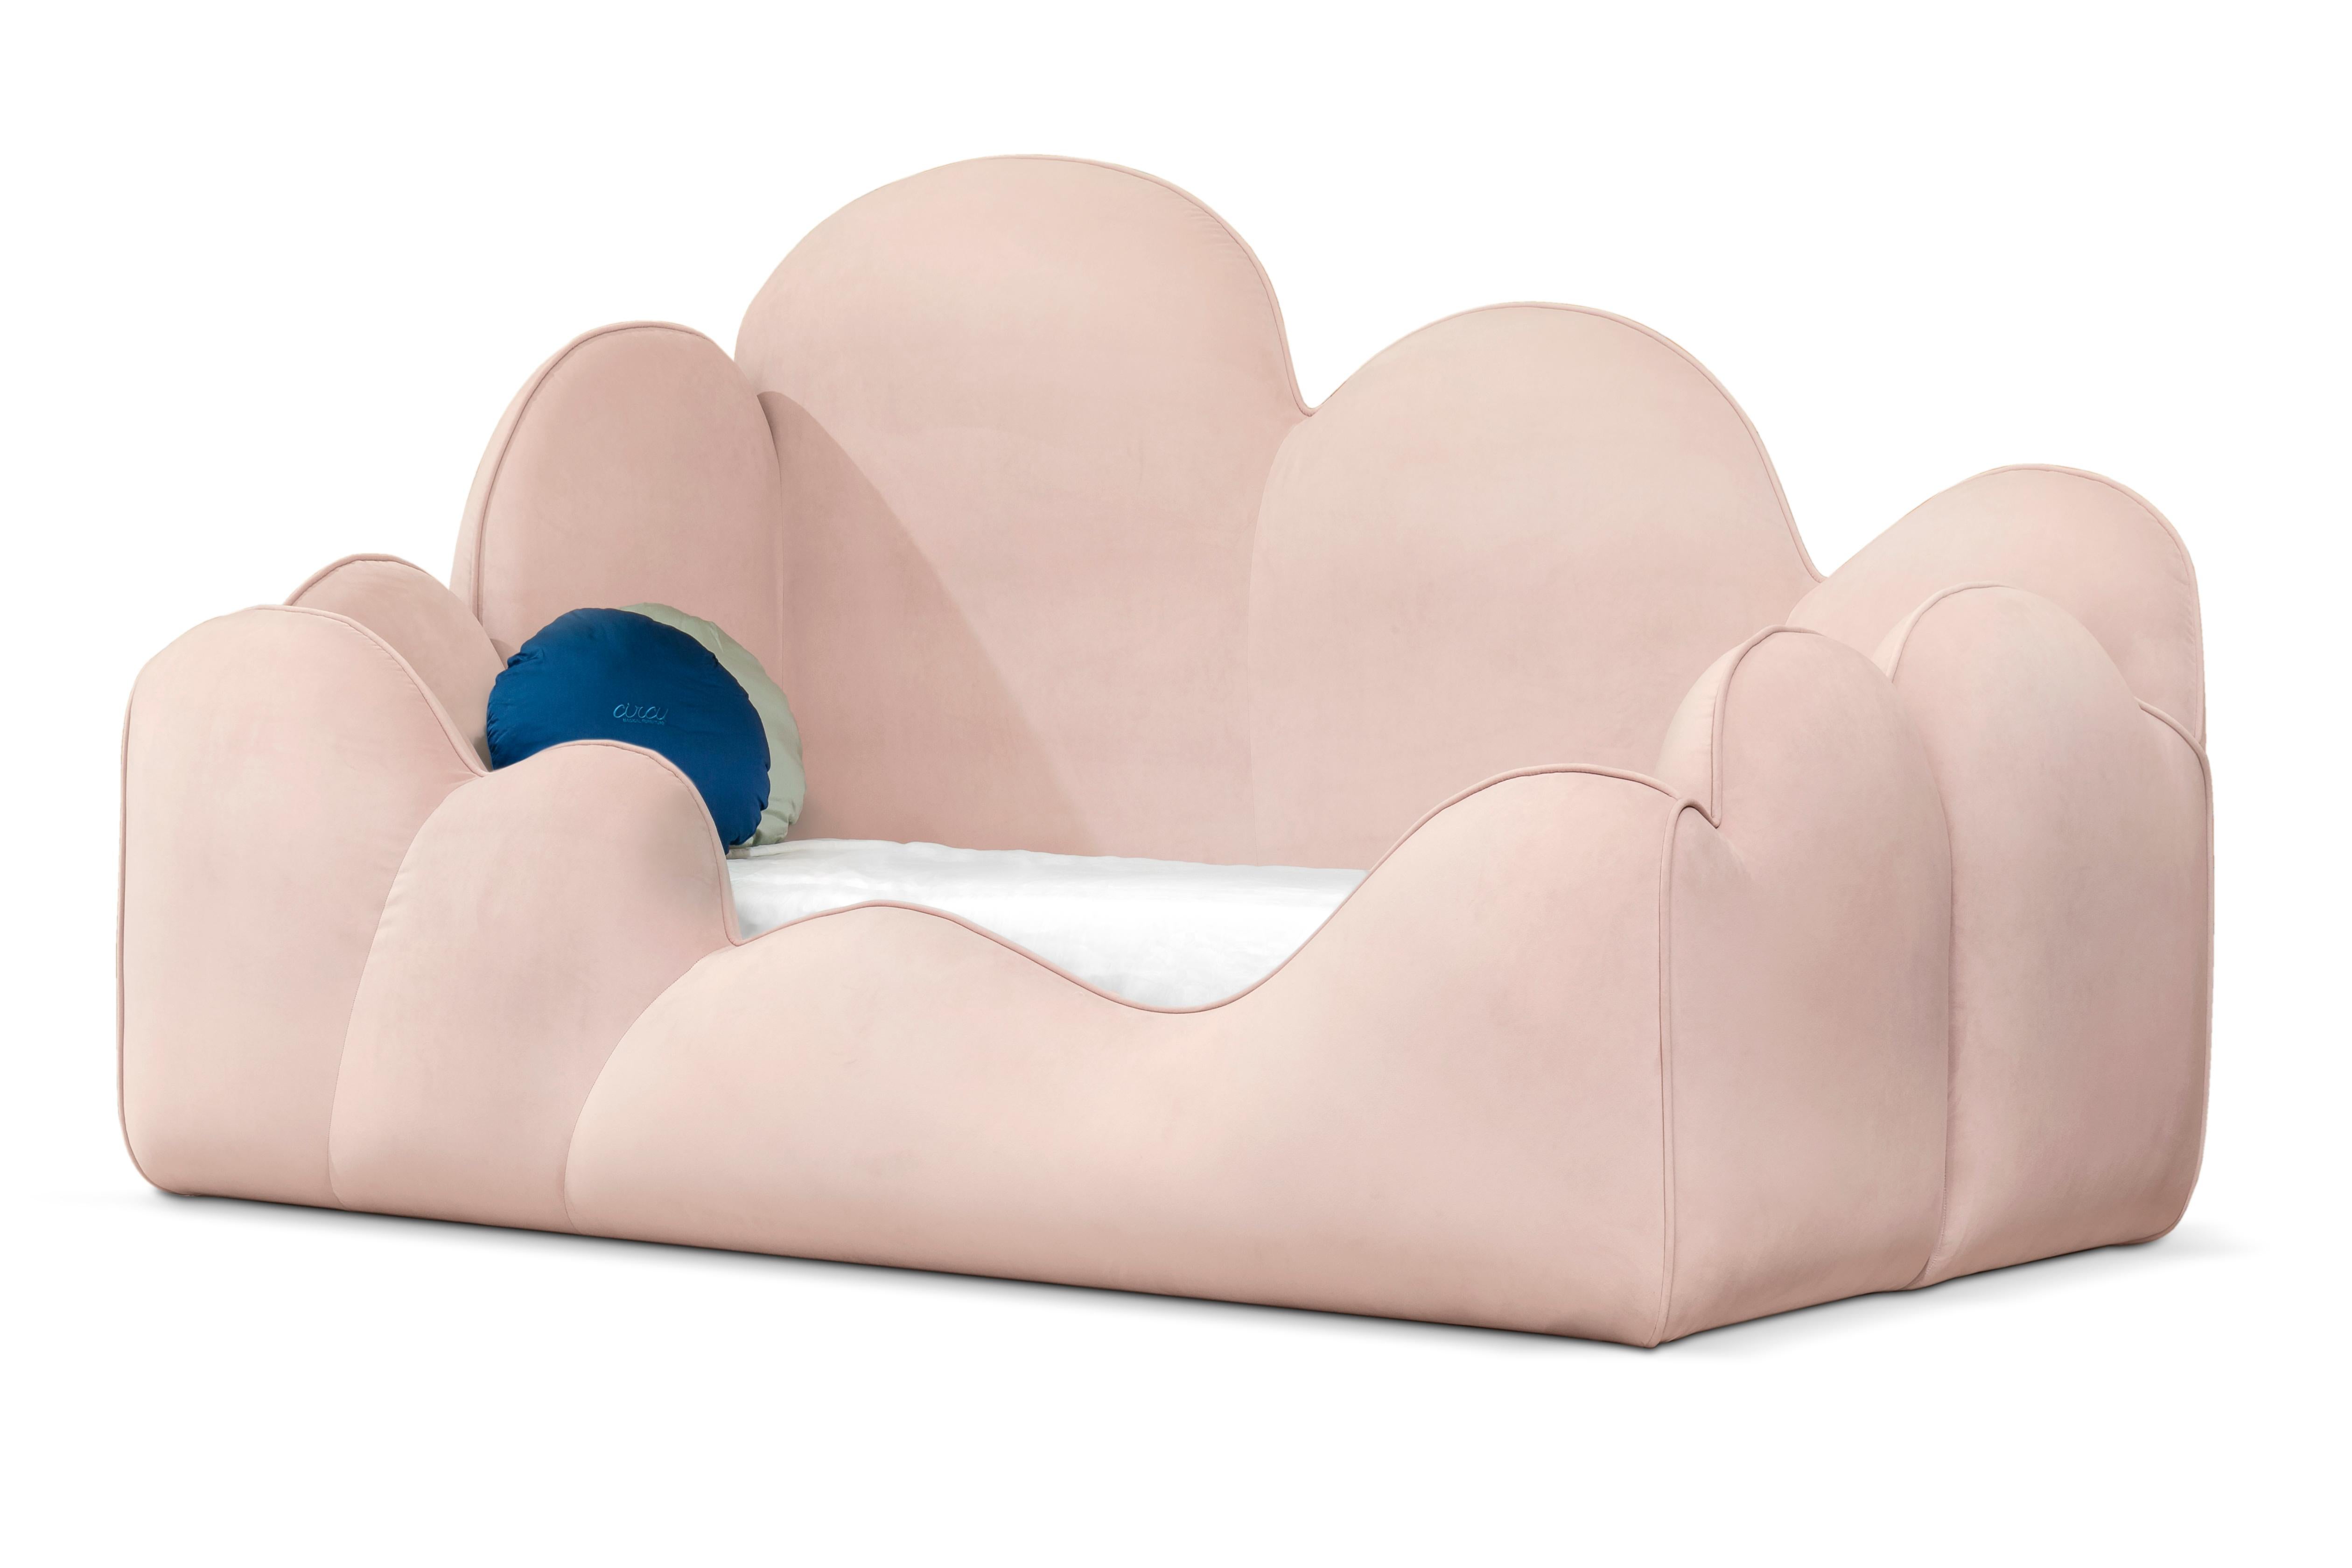 Modern Dino Kid's Bed in Velvet by Circu Magical Furniture

The Modern Dino Kid's Bed in Velvet by Circu Magical Furniture, has got a unique shape and a design that was made to create a safe bedroom for the little ones to rest and feel love and